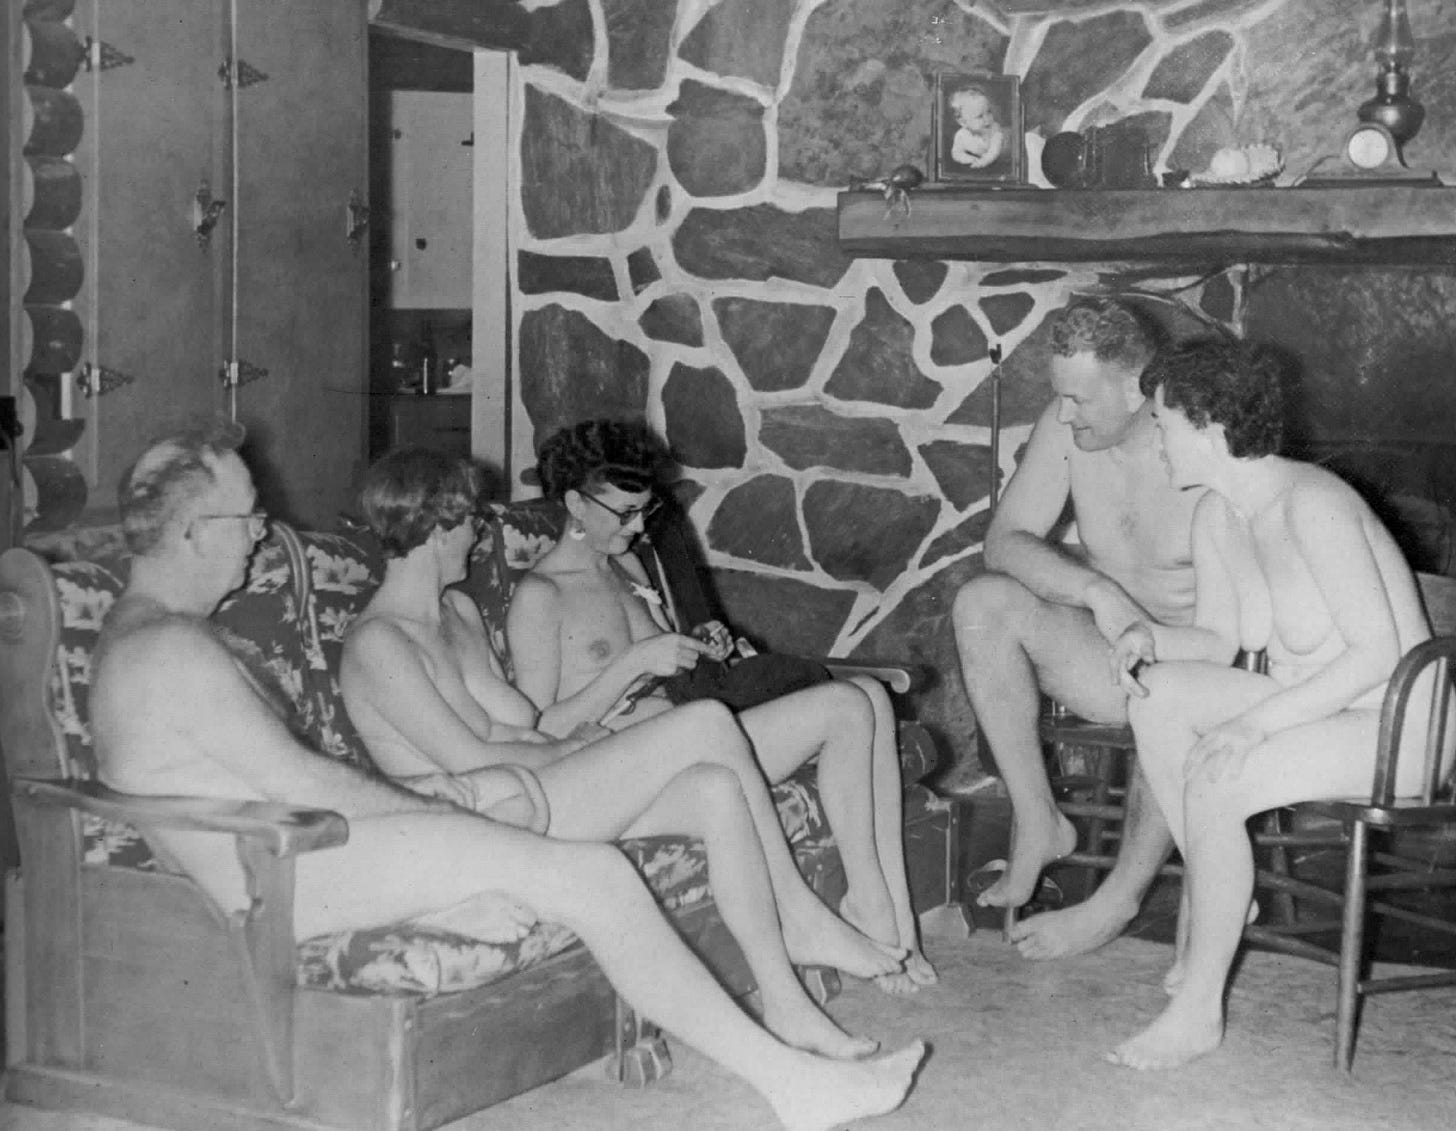 Black and white photo of five adult nudists, men and women, sitting together in a living room. By photographer Norm Cook, c. 1954